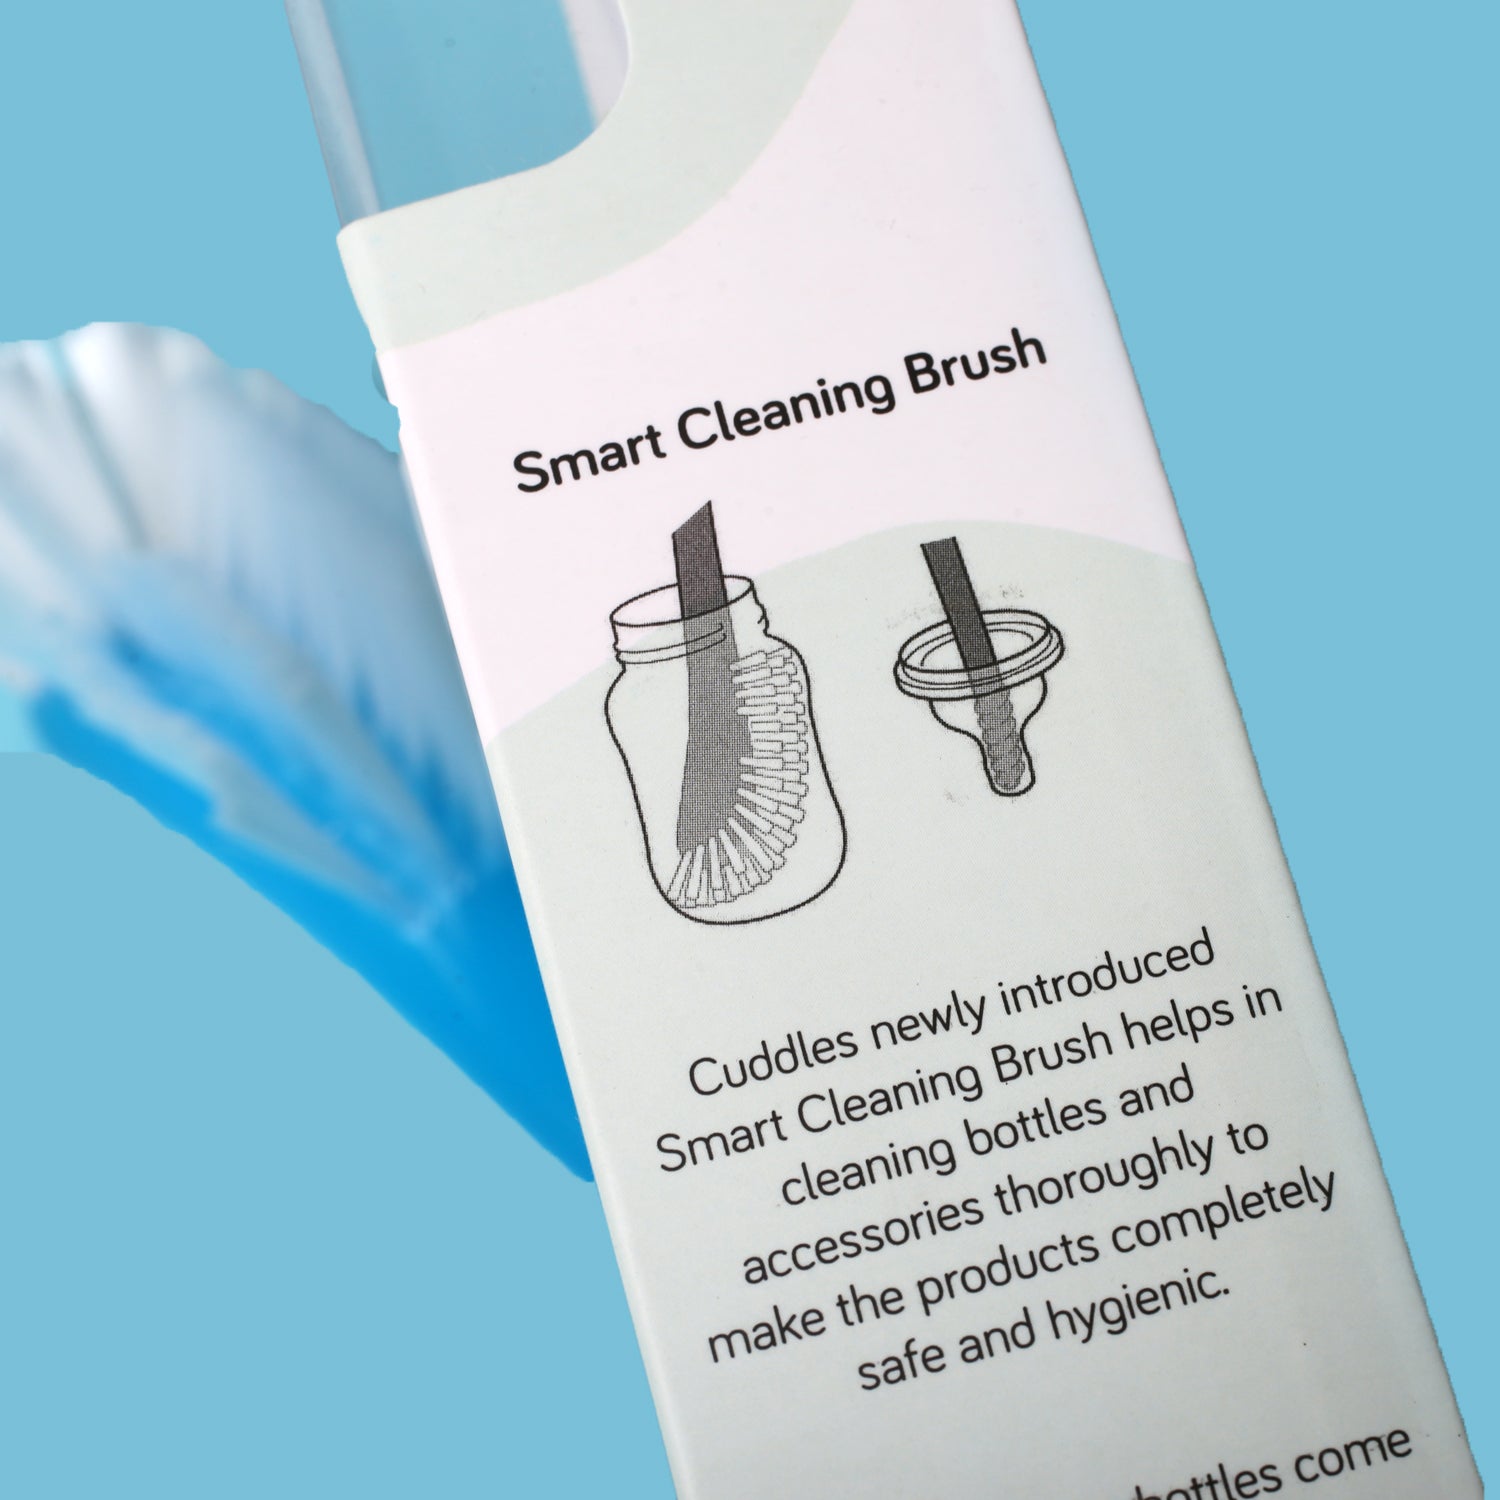 Cuddles Smart Cleaning Brush Blue